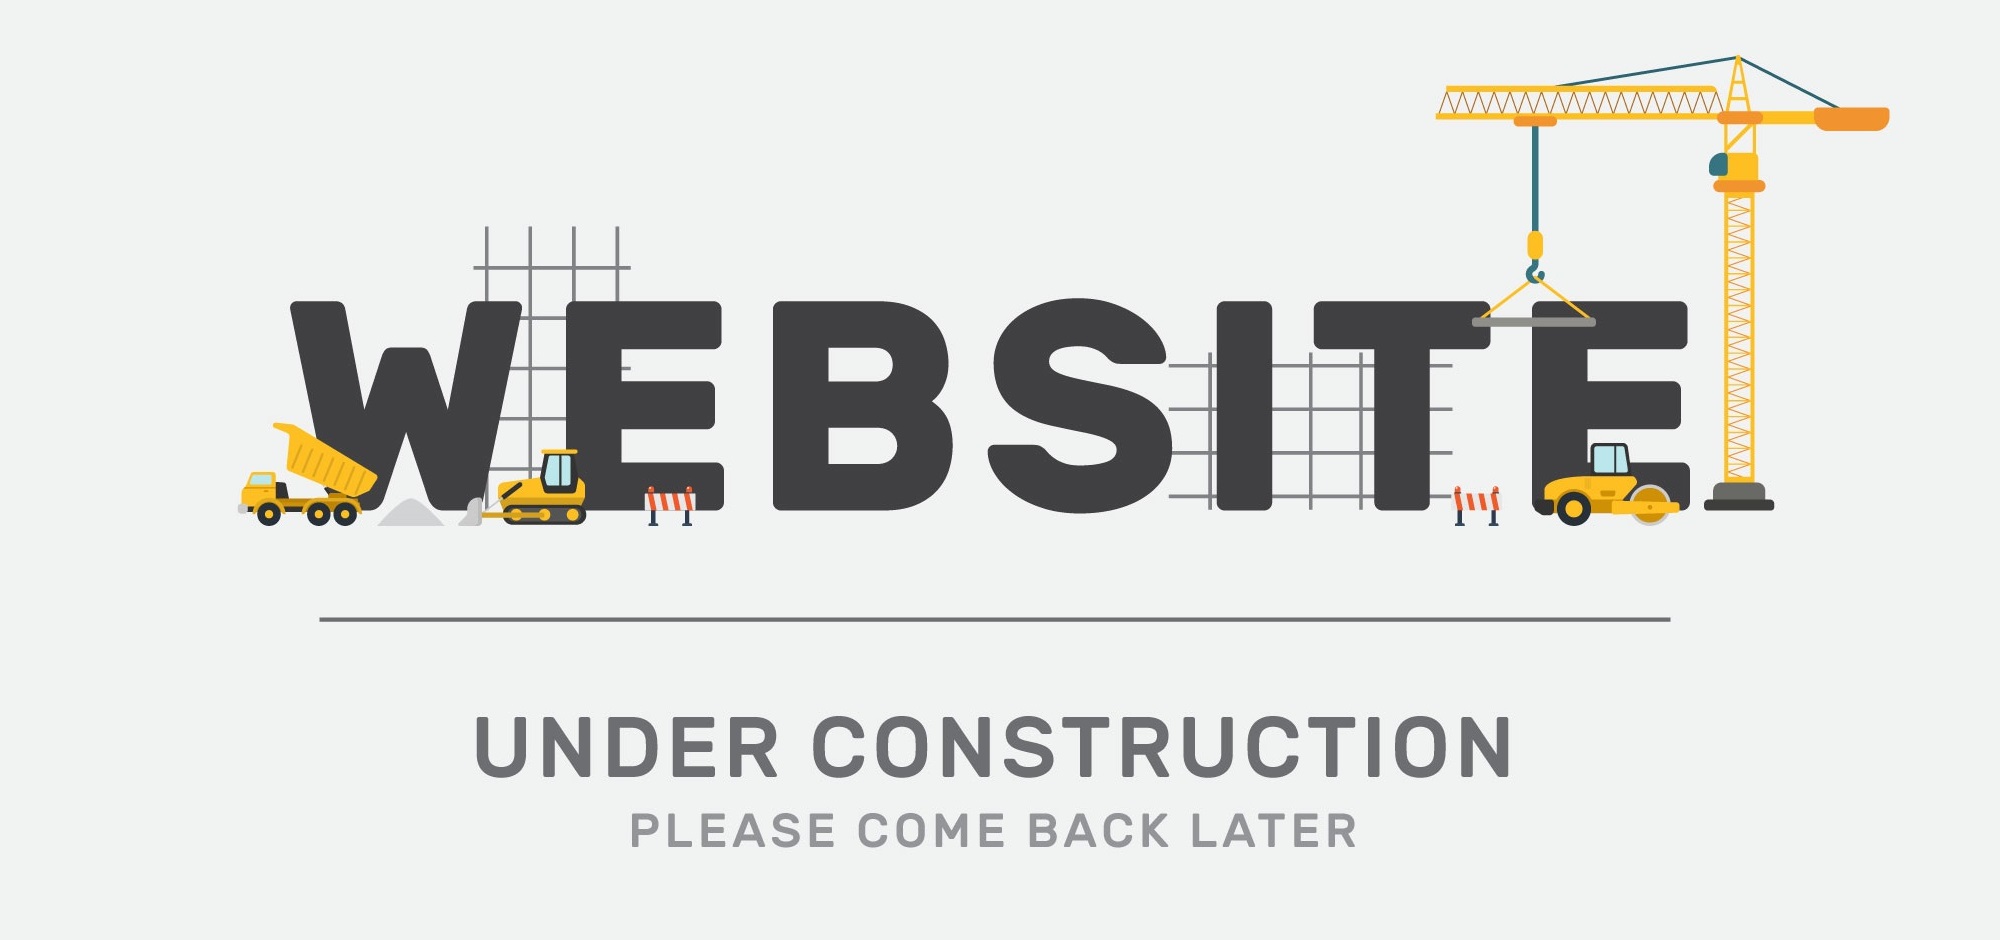 The page is under construction...